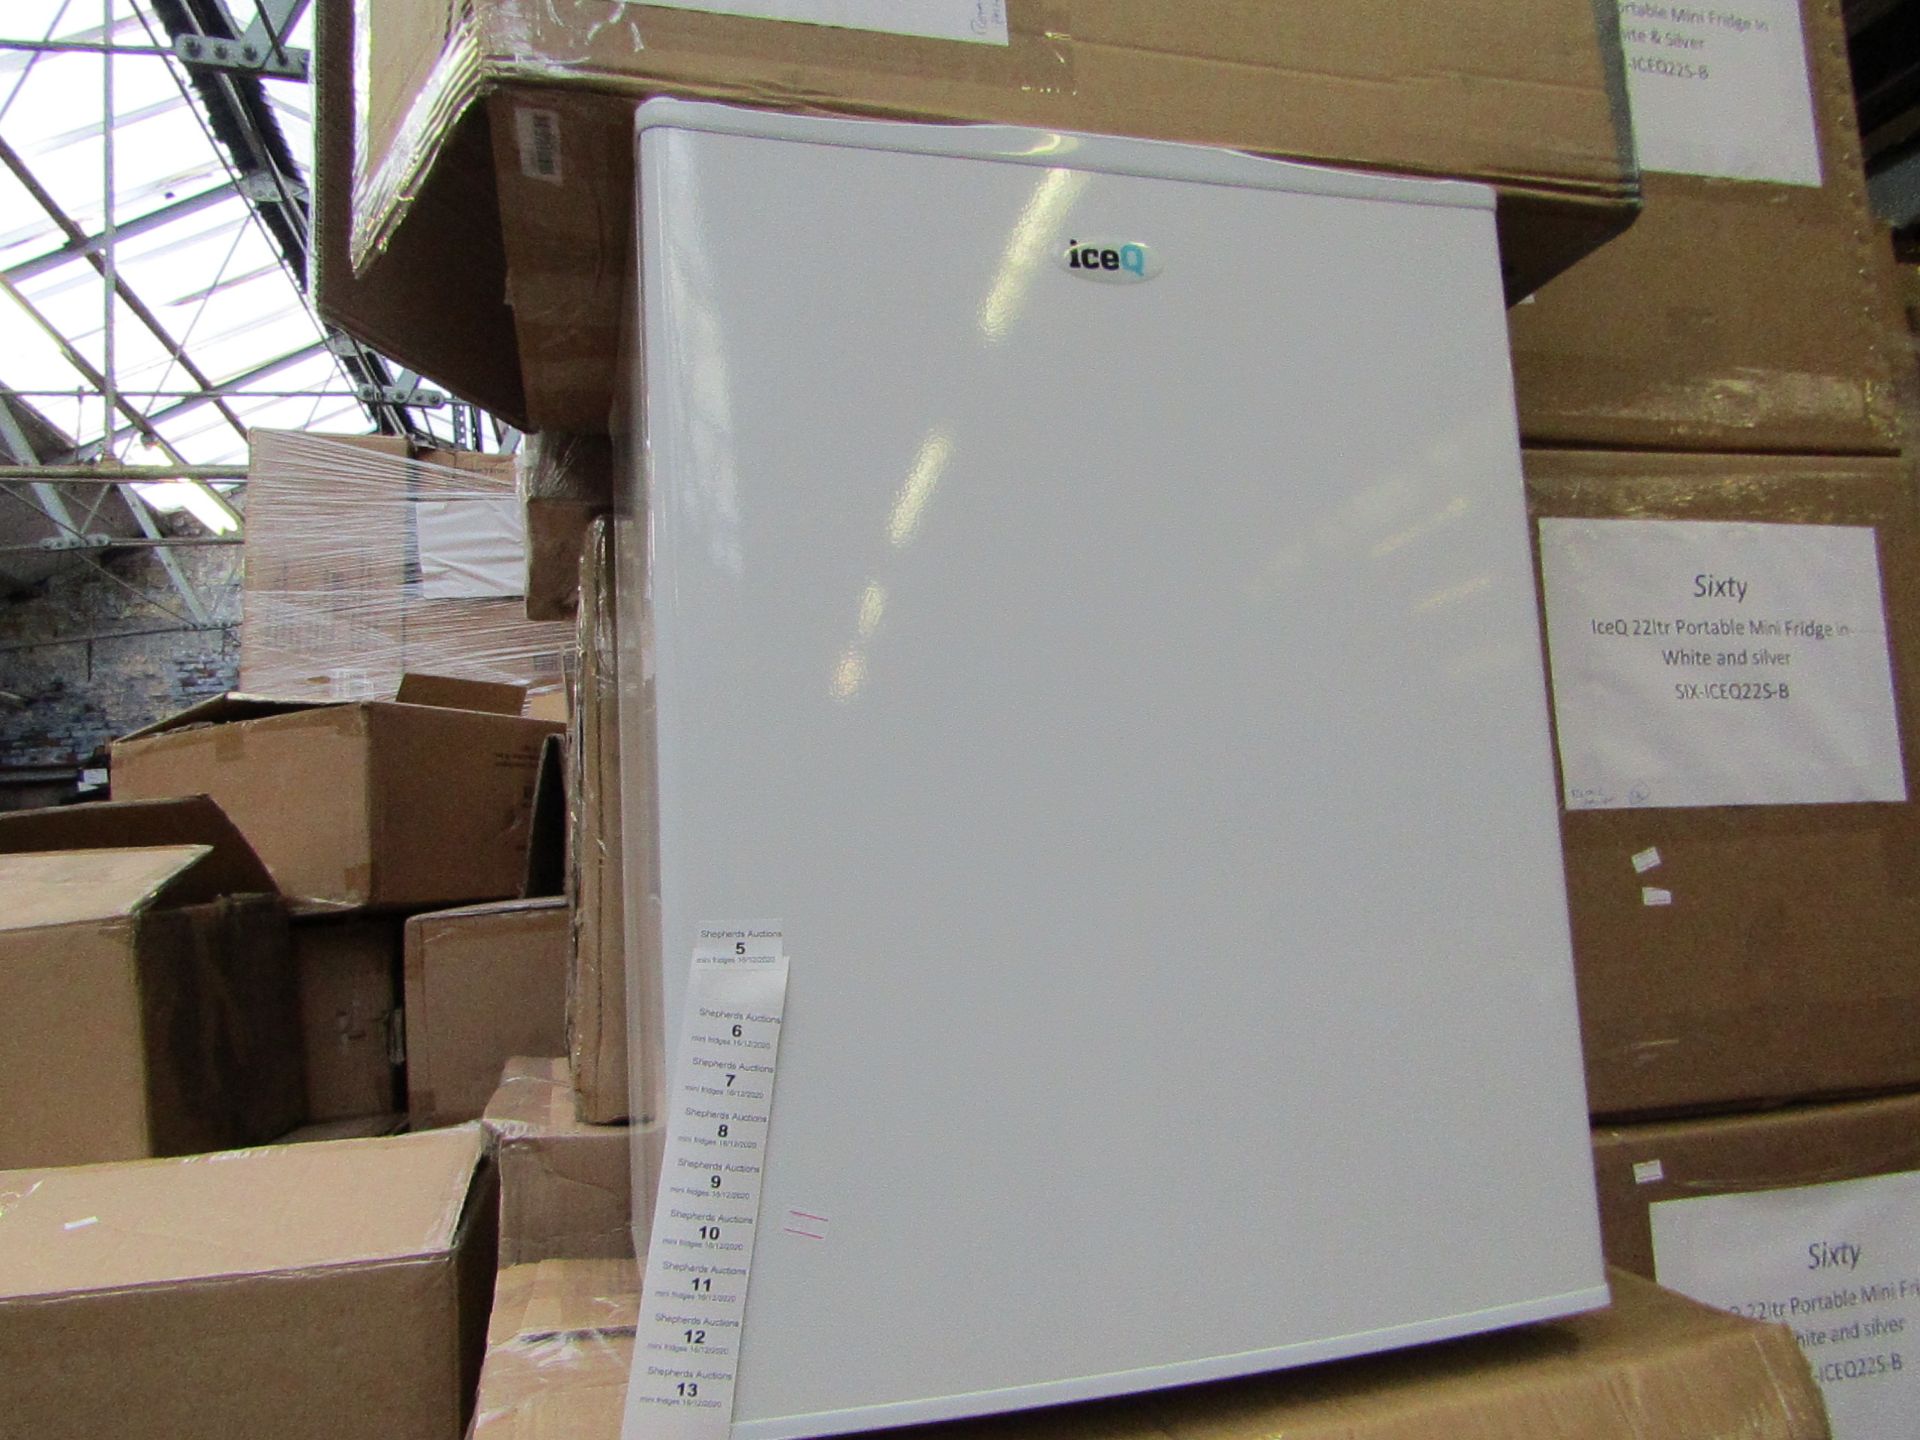 SIXTY IceQ 70ltr Table Top Fridge in White, Refurbished RRP £119.99